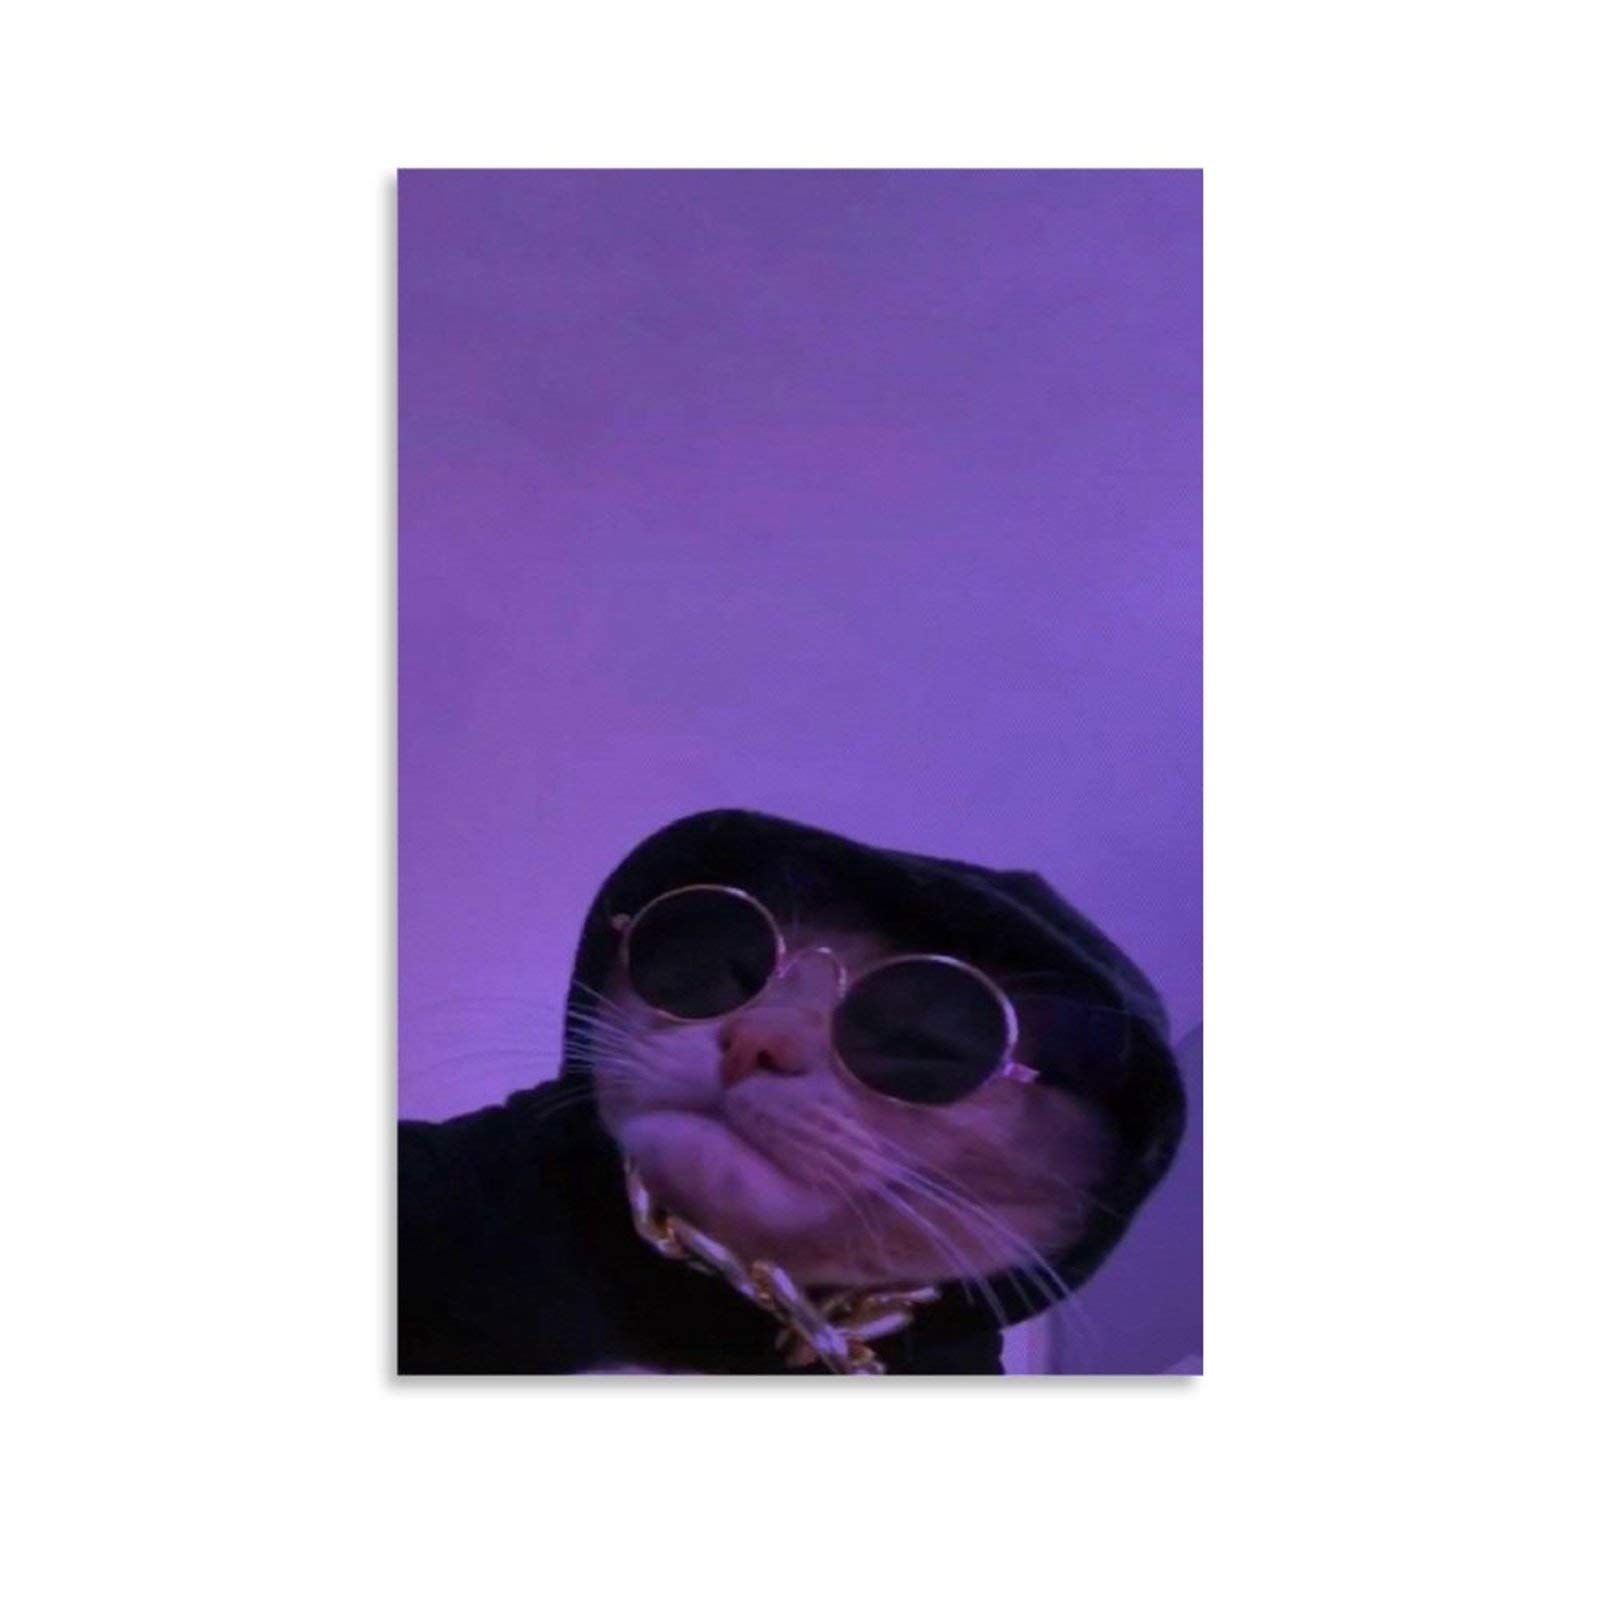 A cat wearing sunglasses and sitting in front of an image - Cat